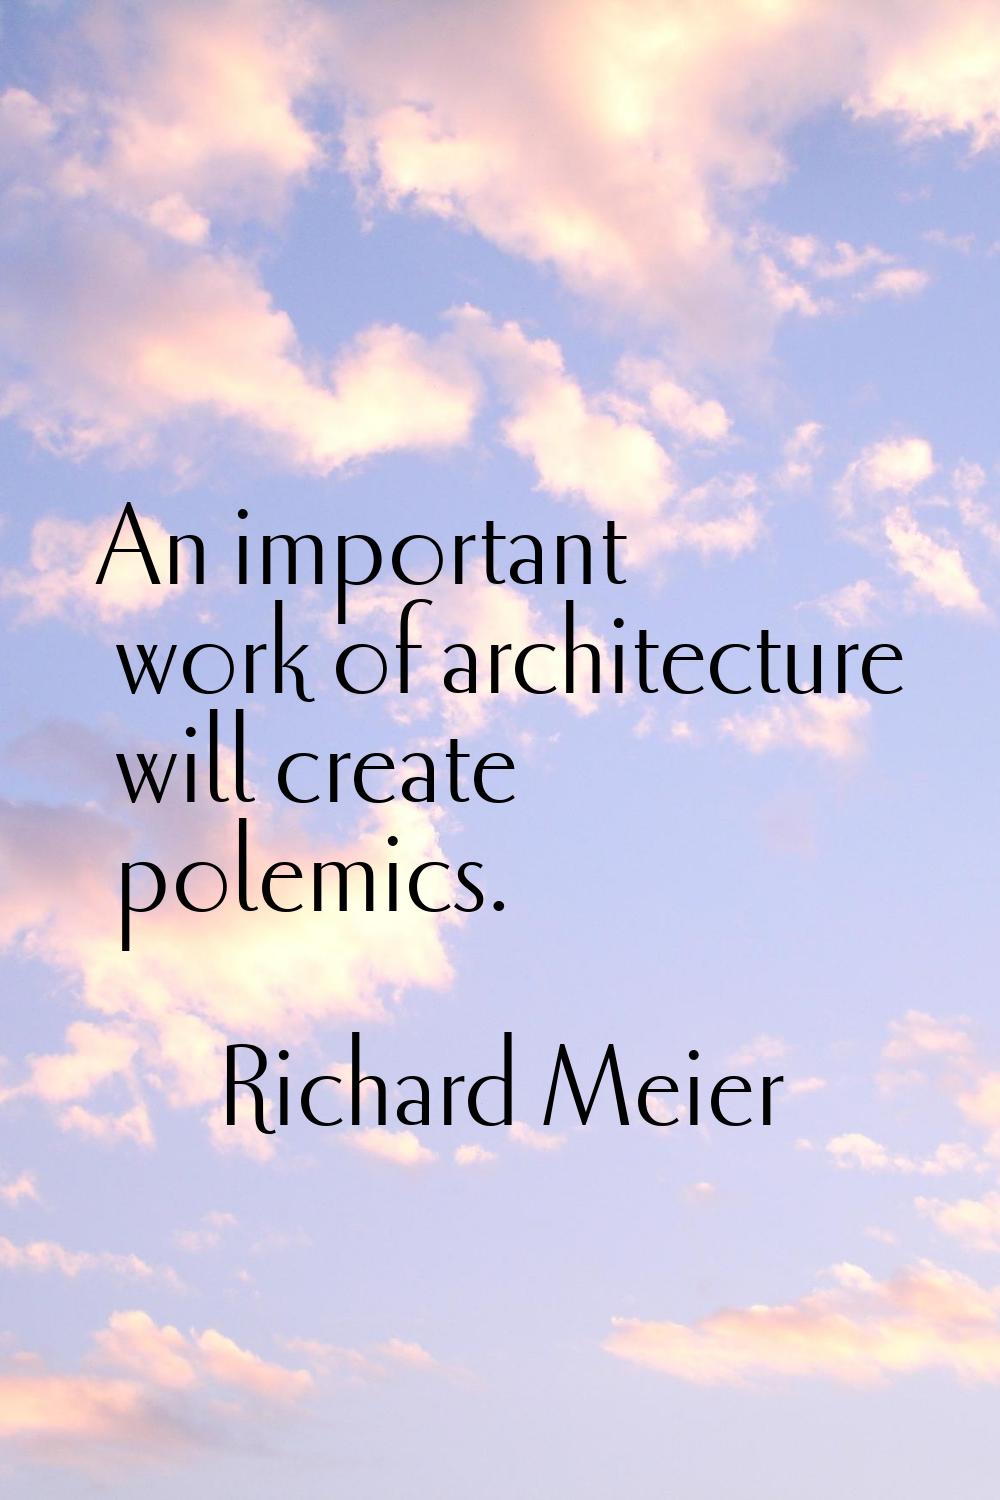 An important work of architecture will create polemics.